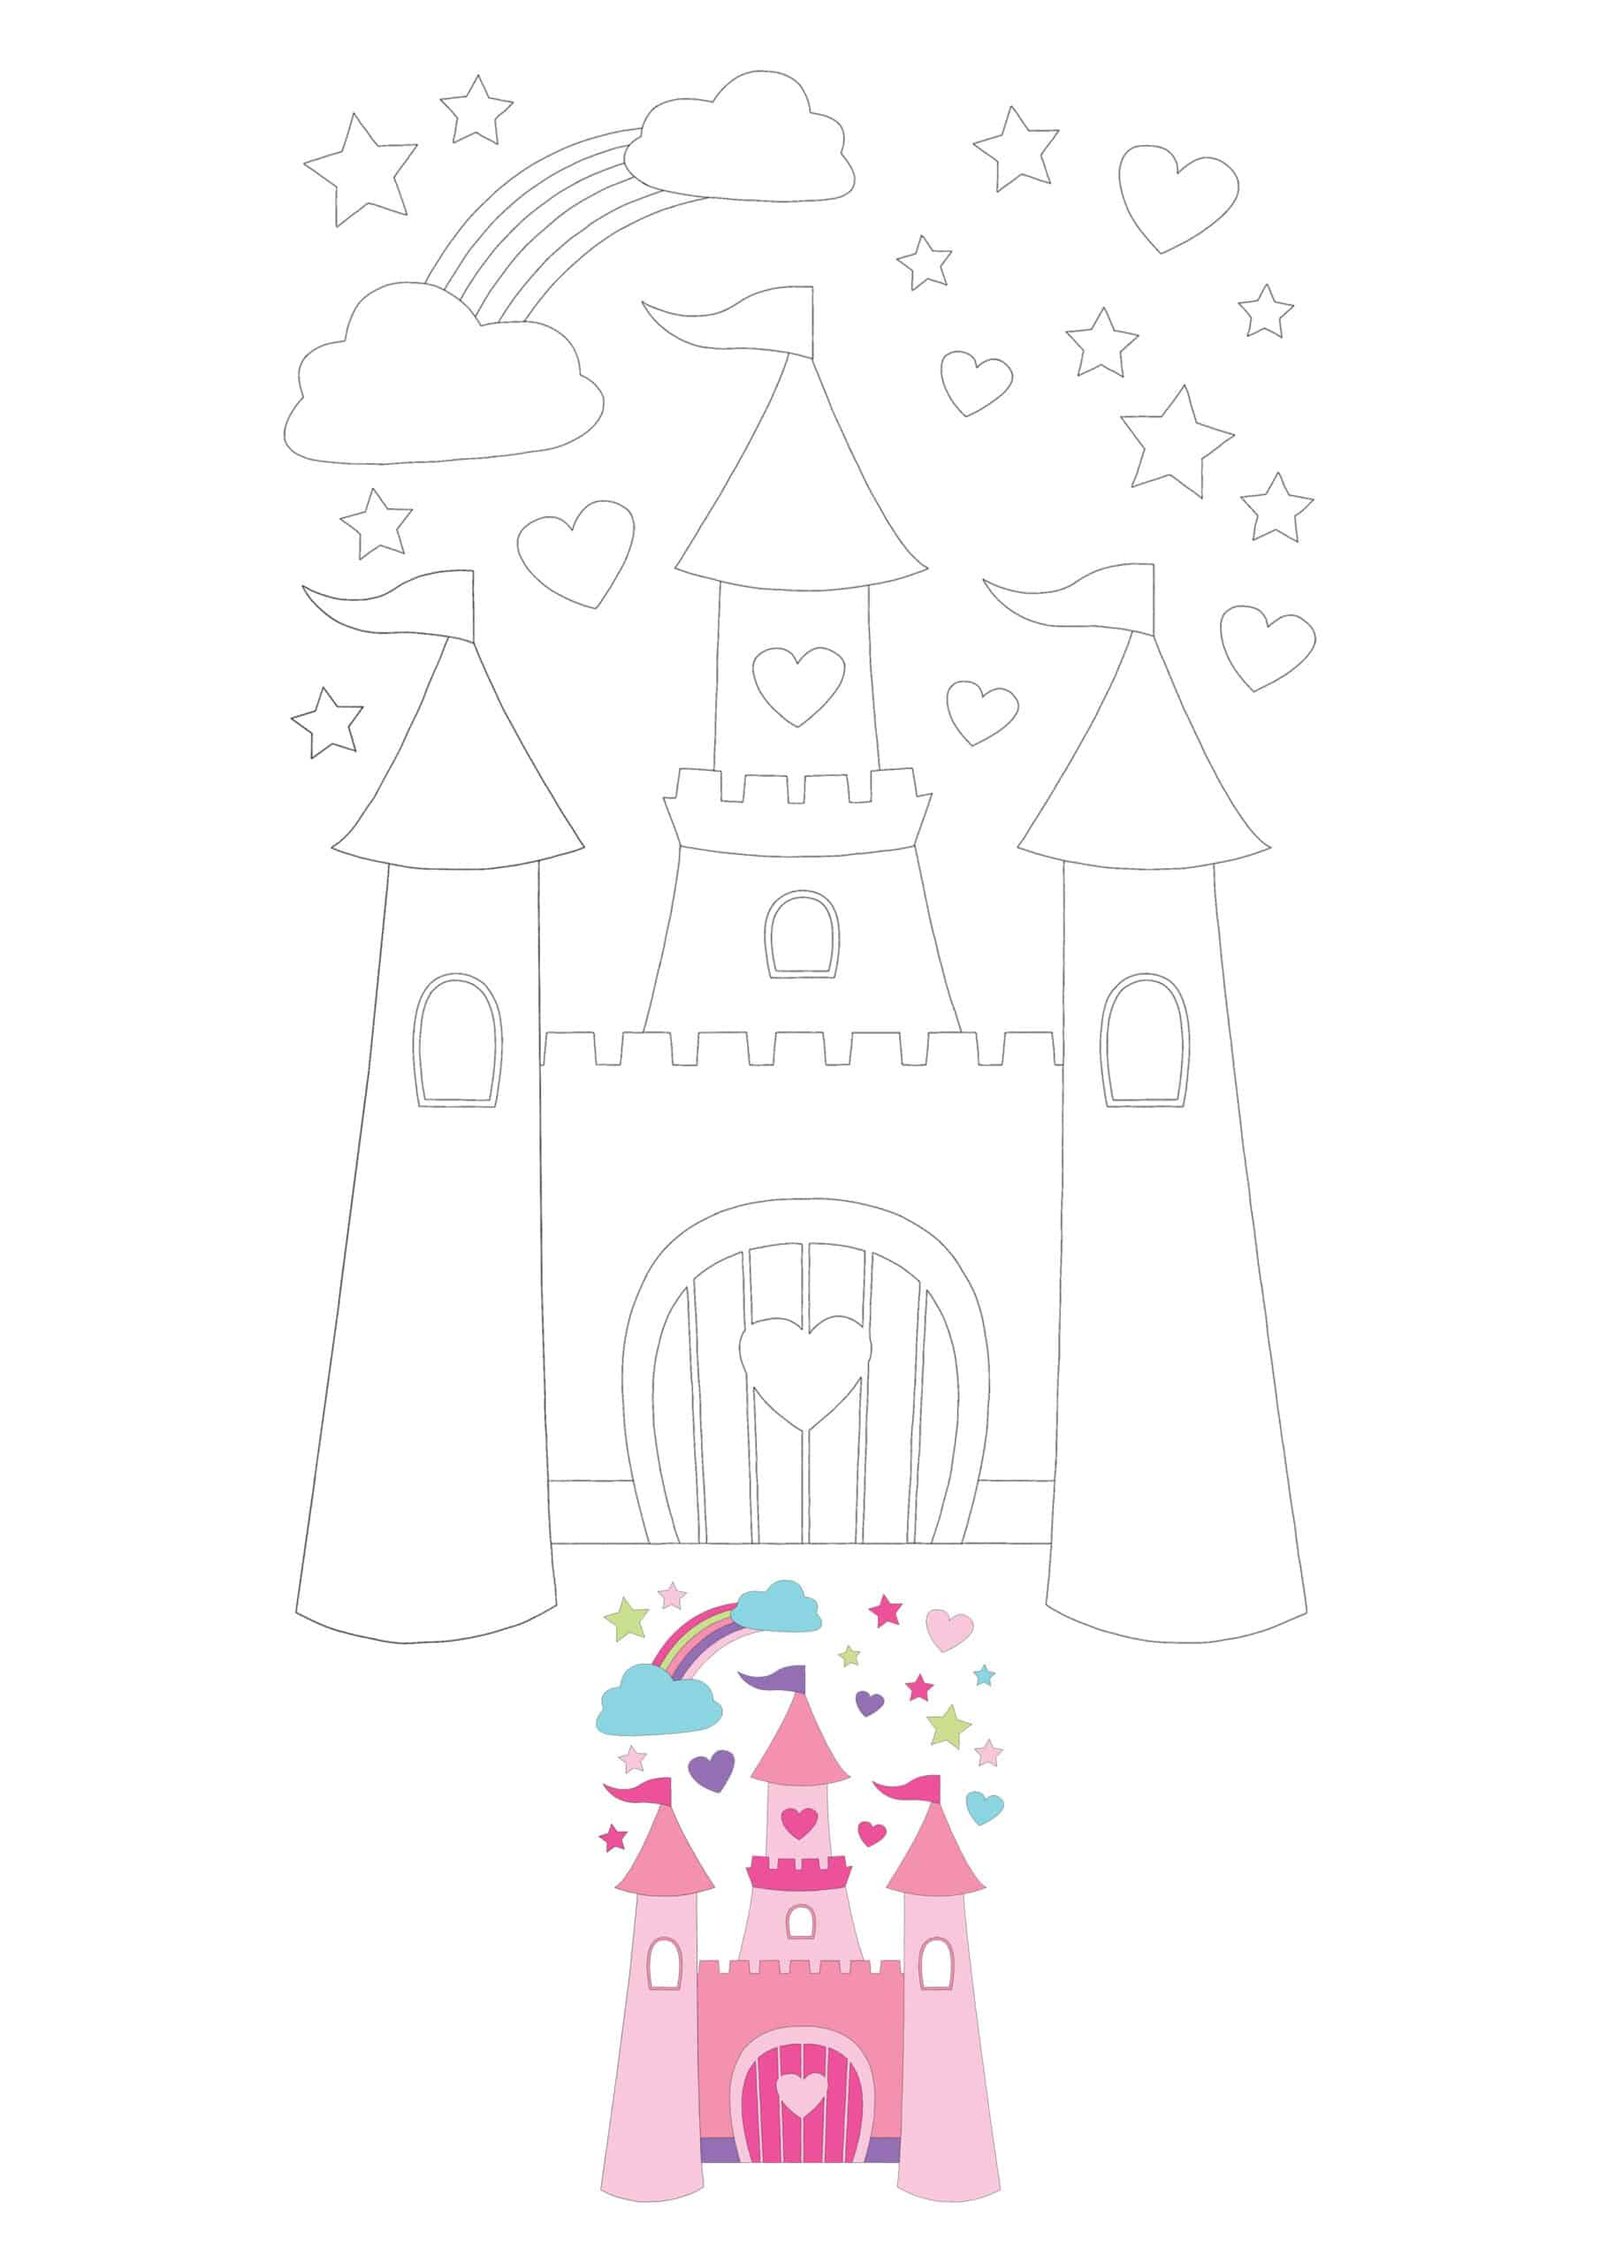 Easy Princess Castle coloring page for kids